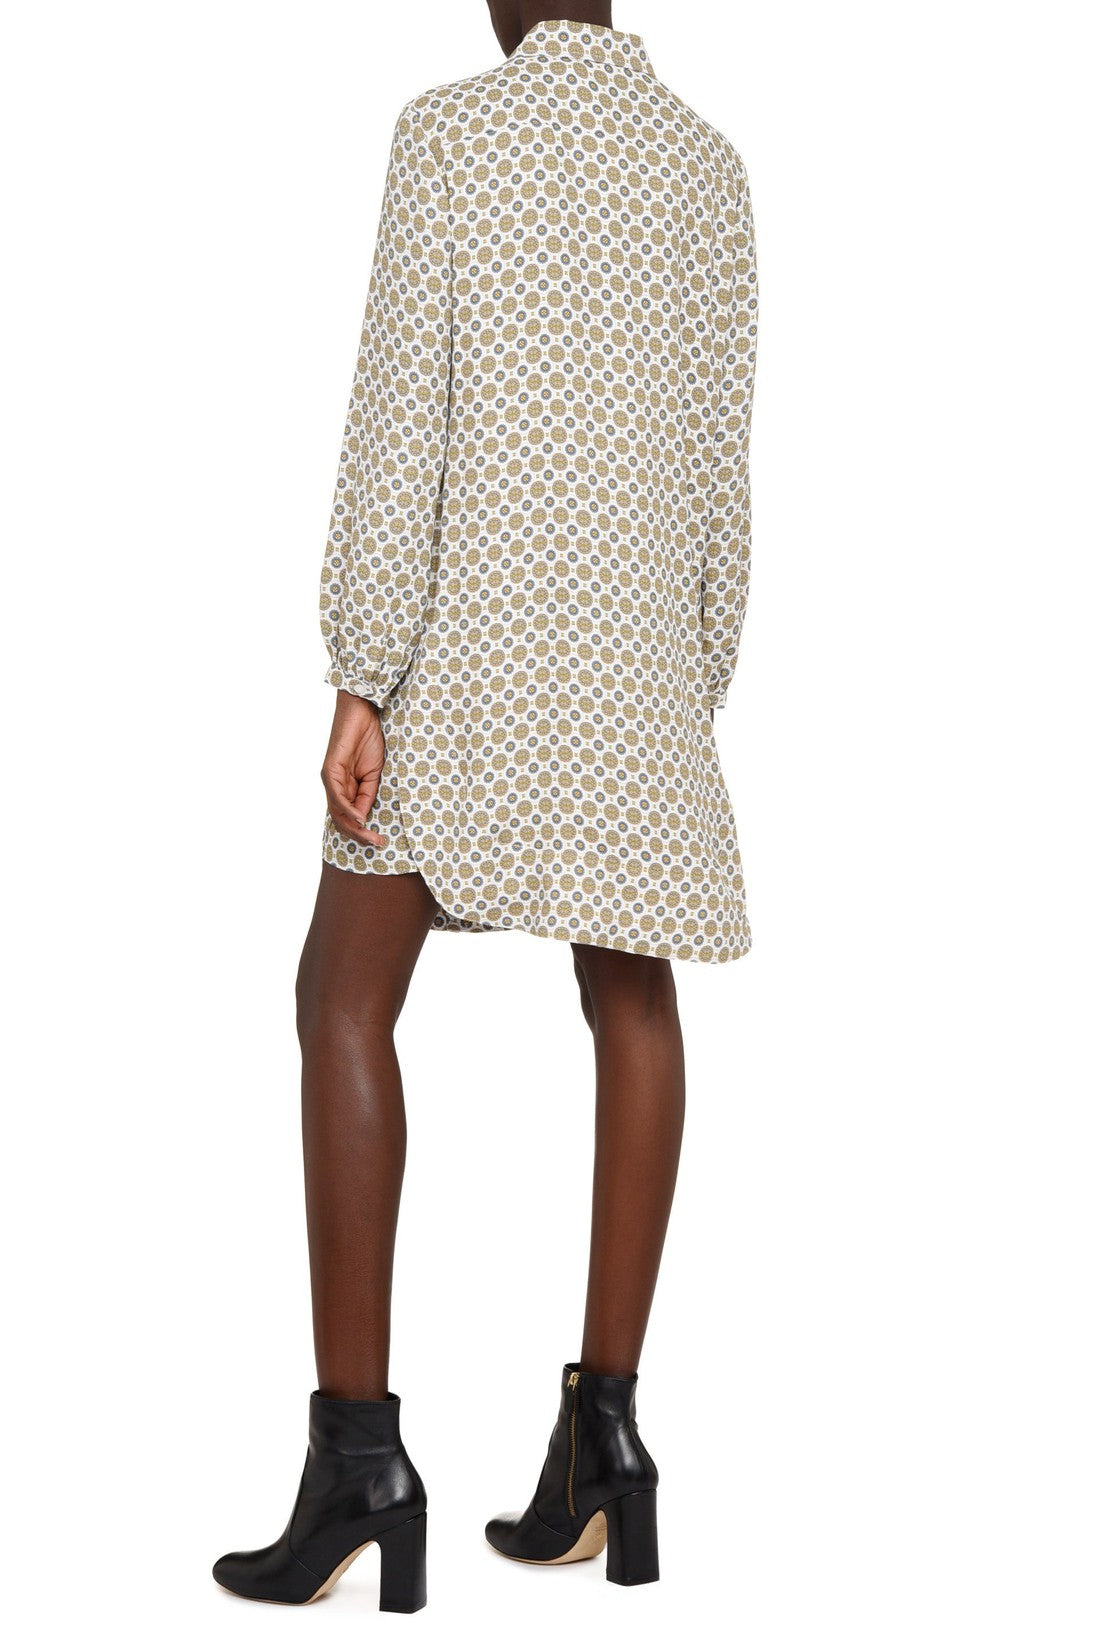 Tory Burch-OUTLET-SALE-Cora printed shirtdress-ARCHIVIST